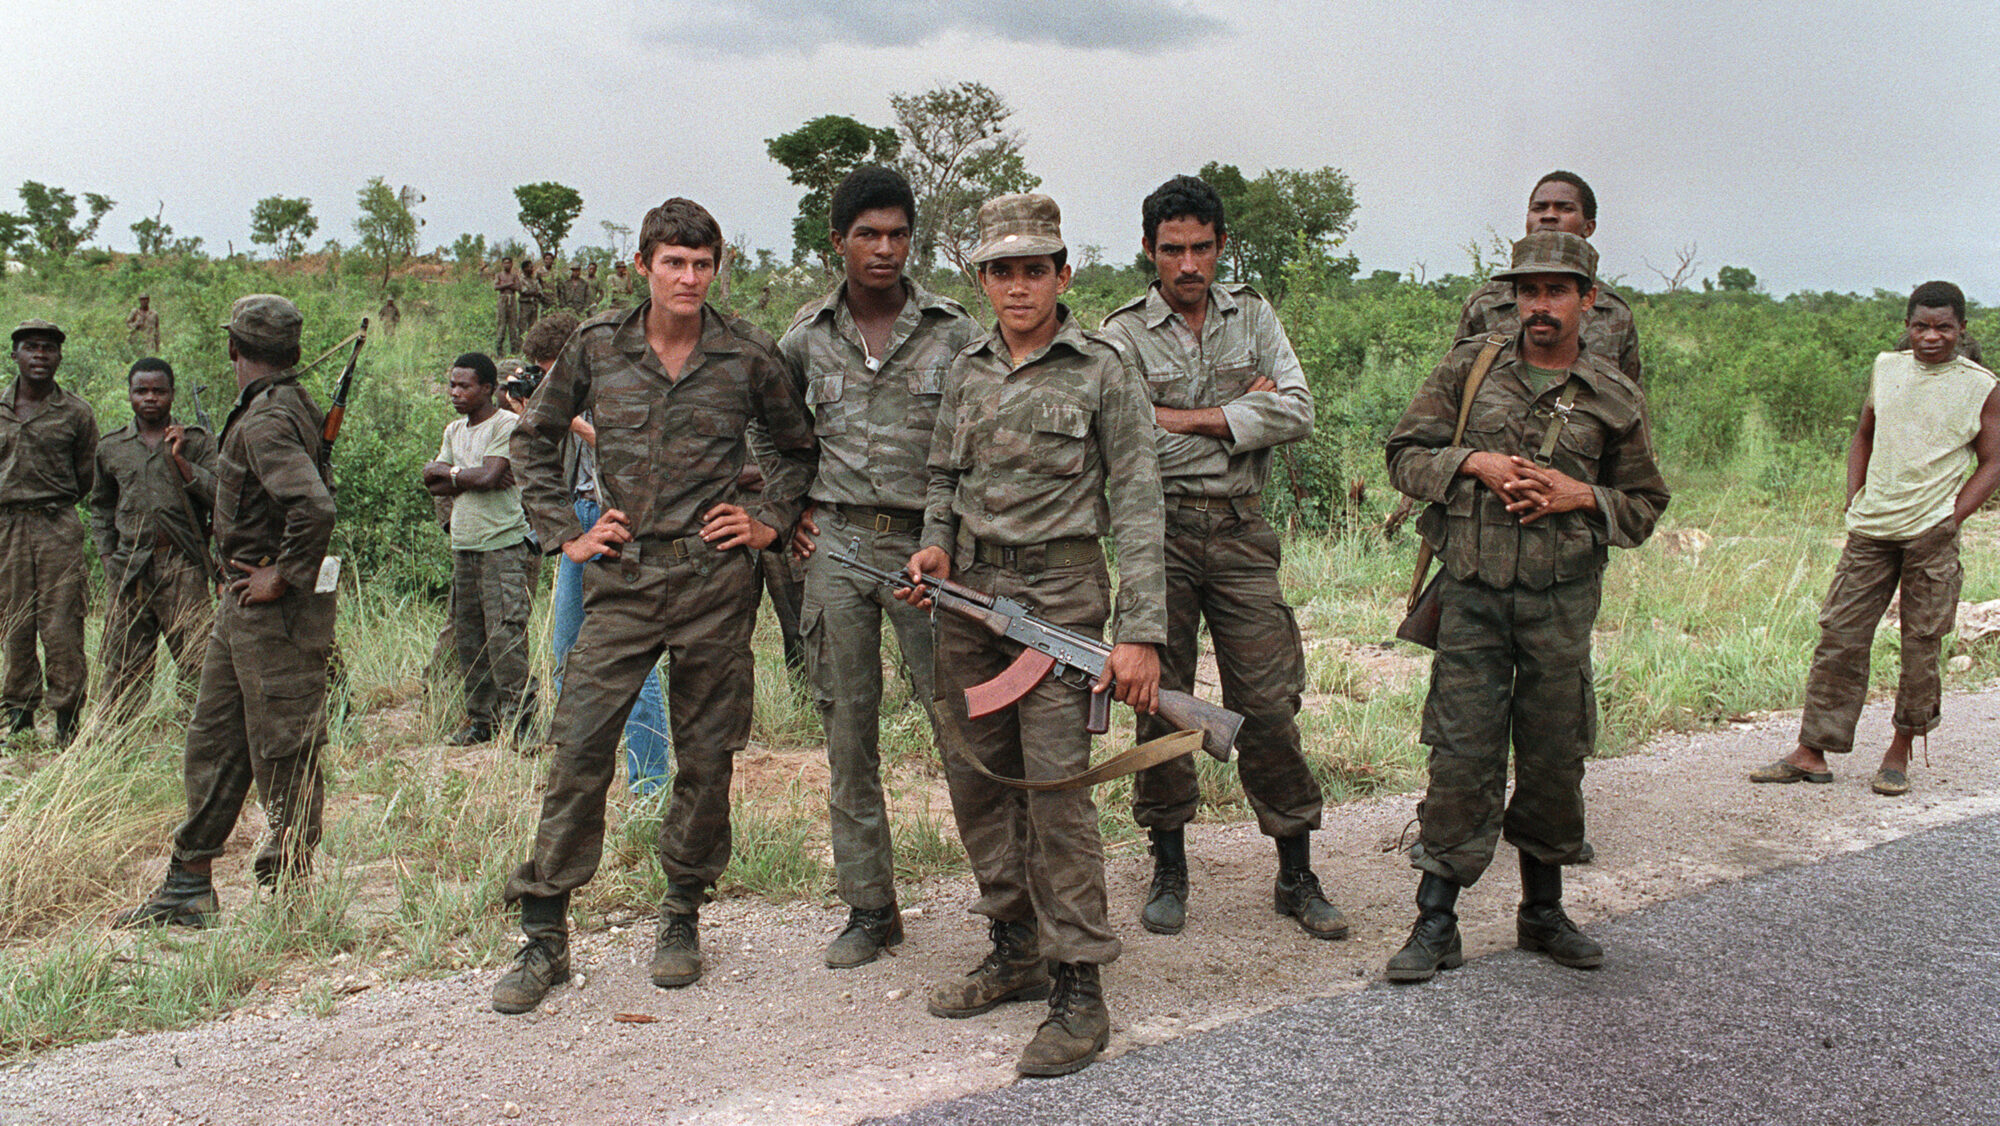 Cuban soldiers pose with Soviet-backed Popular Movement for the Liberation of Angola soldiers near Cuito Cuanavale. The struggle between pro-Western and pro-Soviet military factions in Angola was a major front in the Cold War, resulting in the participation of 40,000 Cuban troops.